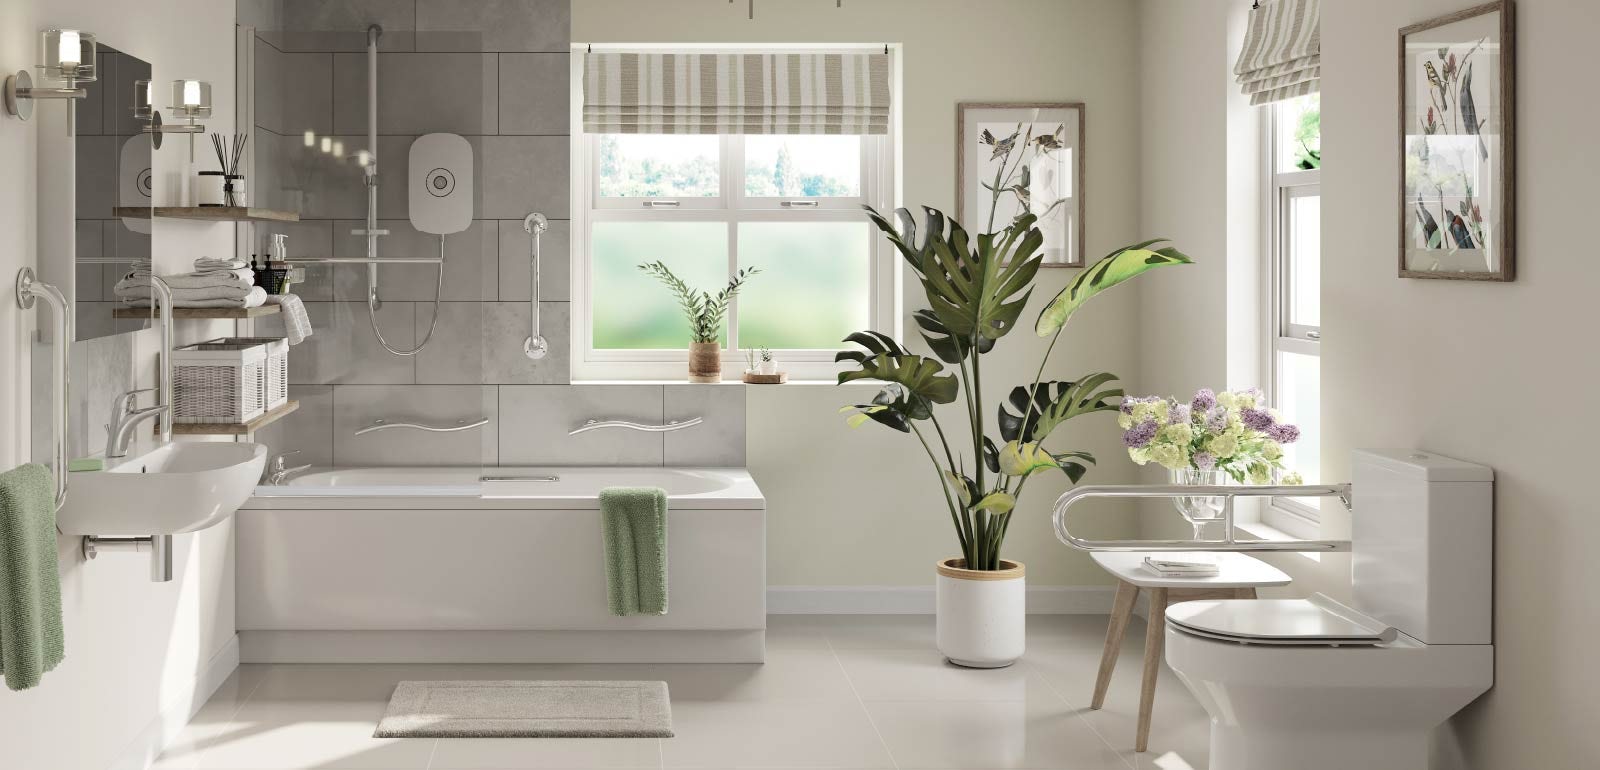 Independent Living: Bathroom ideas for the elderly